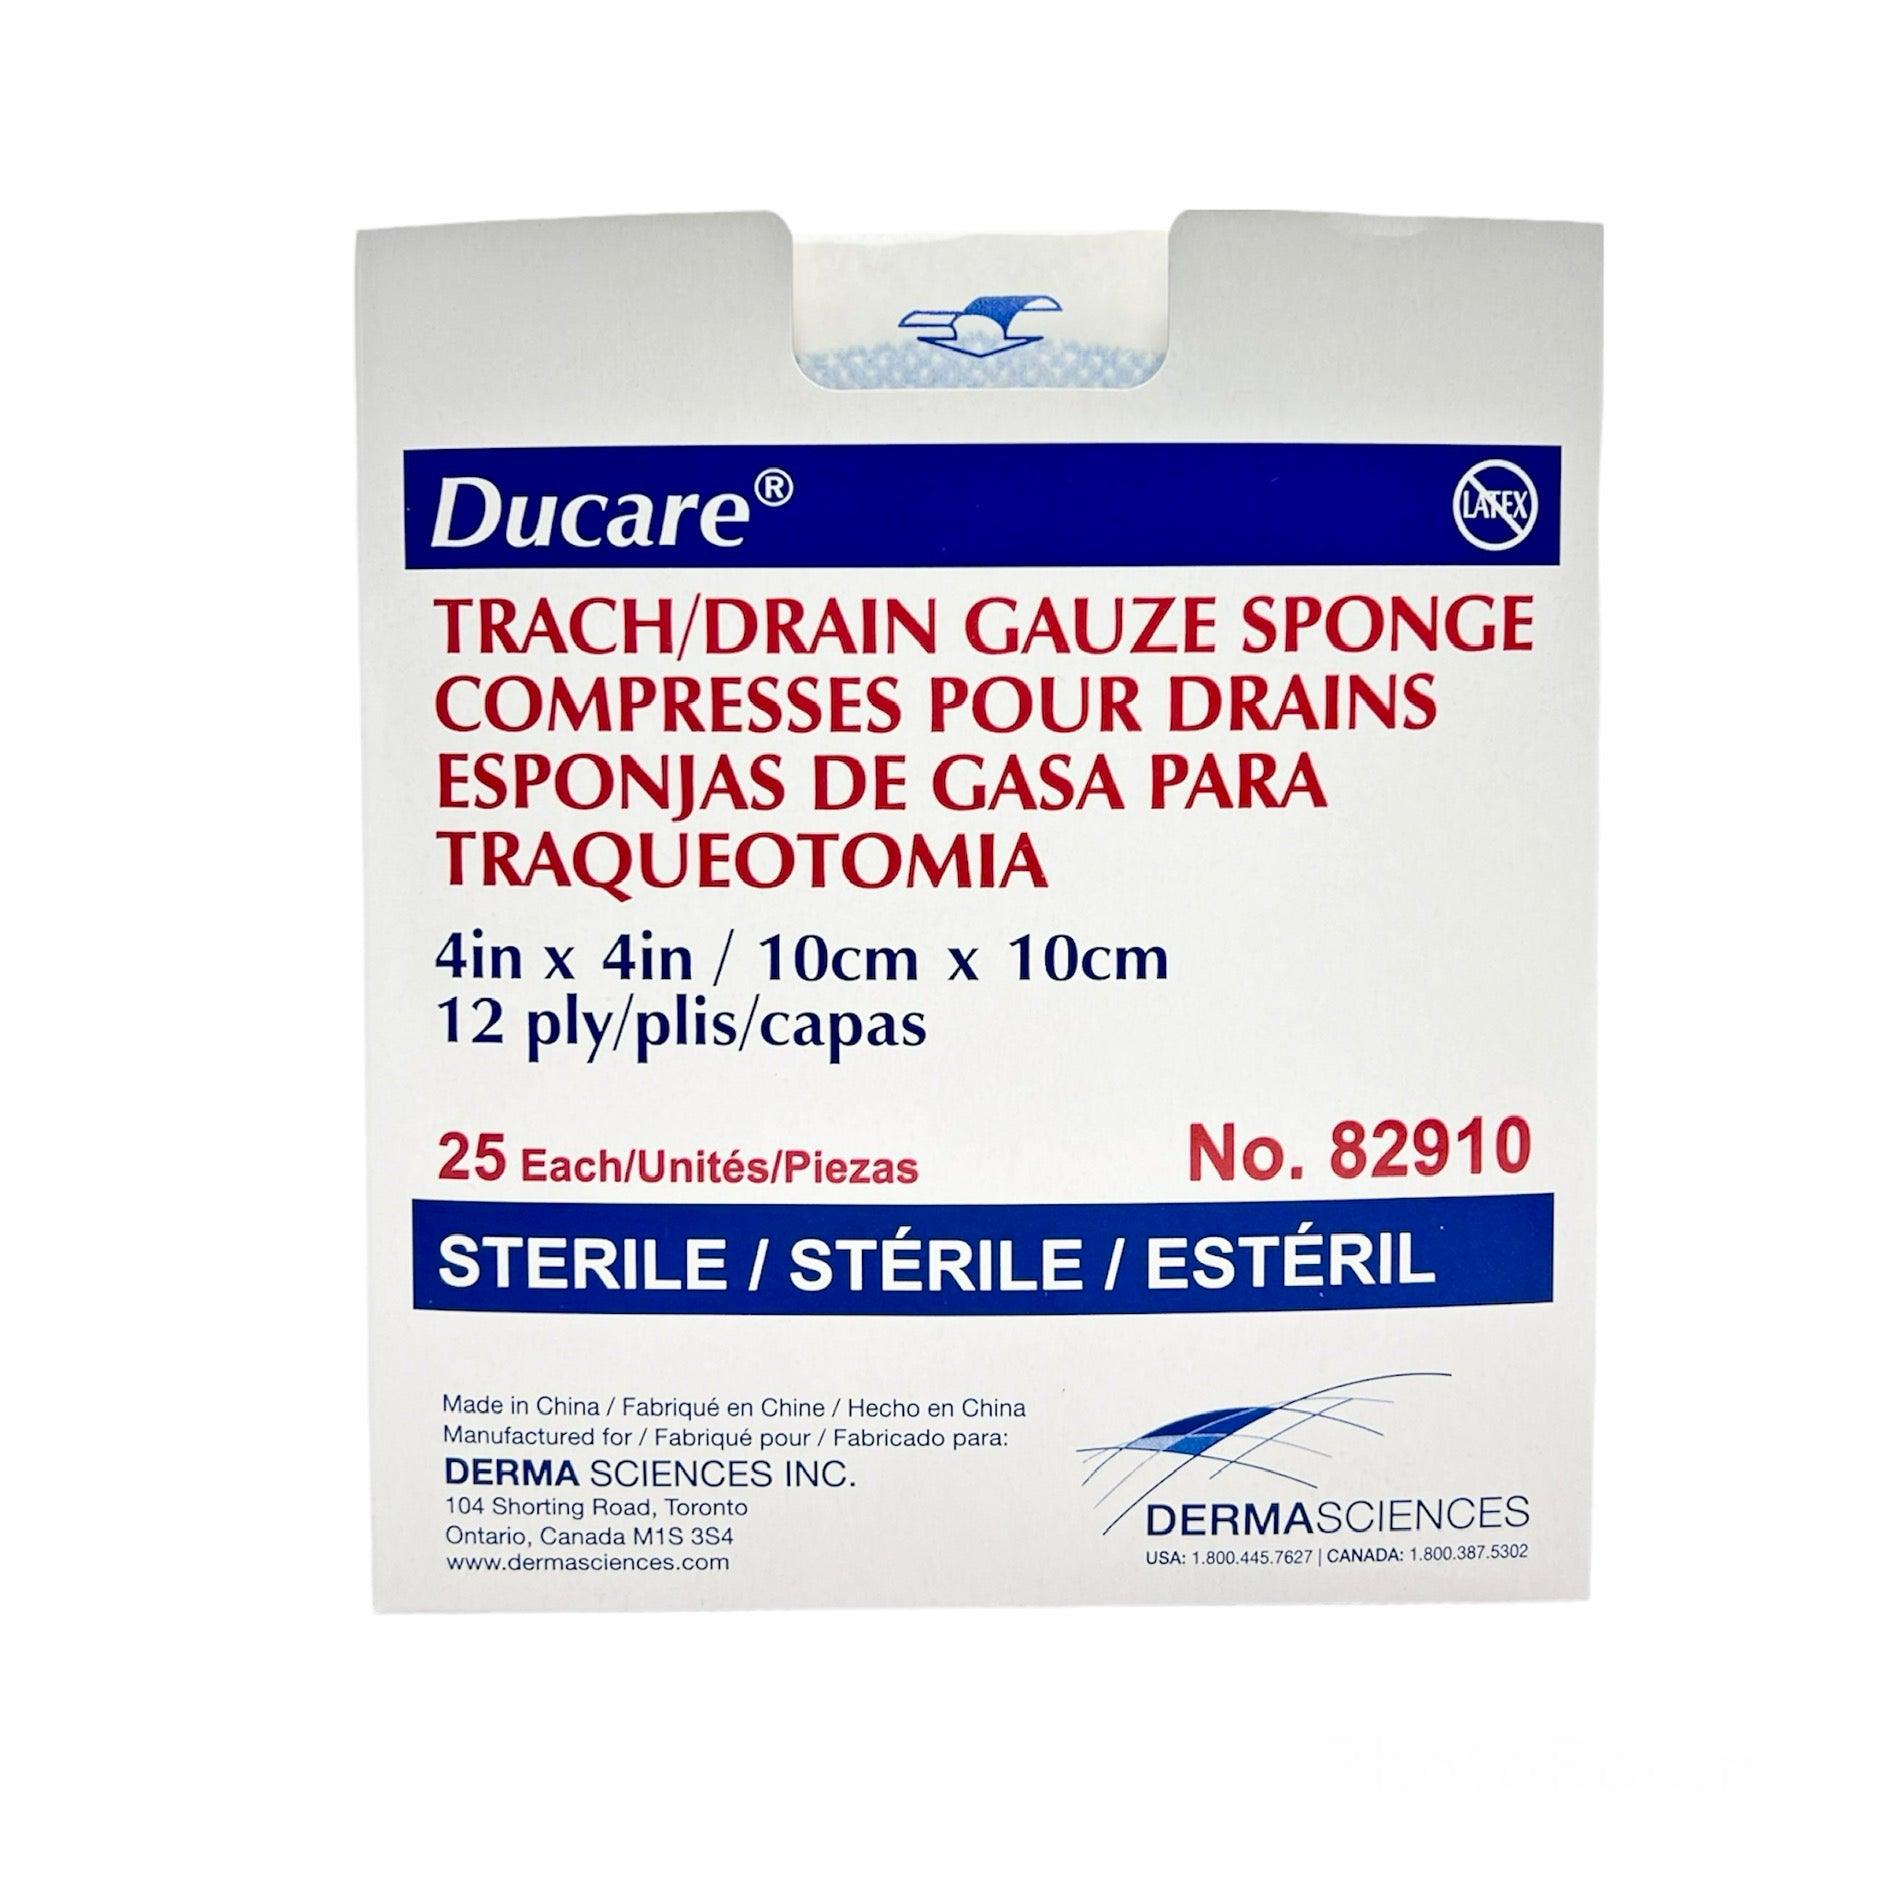 Derma Sciences I.V. and Tracheostomy Dressings 12-PLY- Ducare